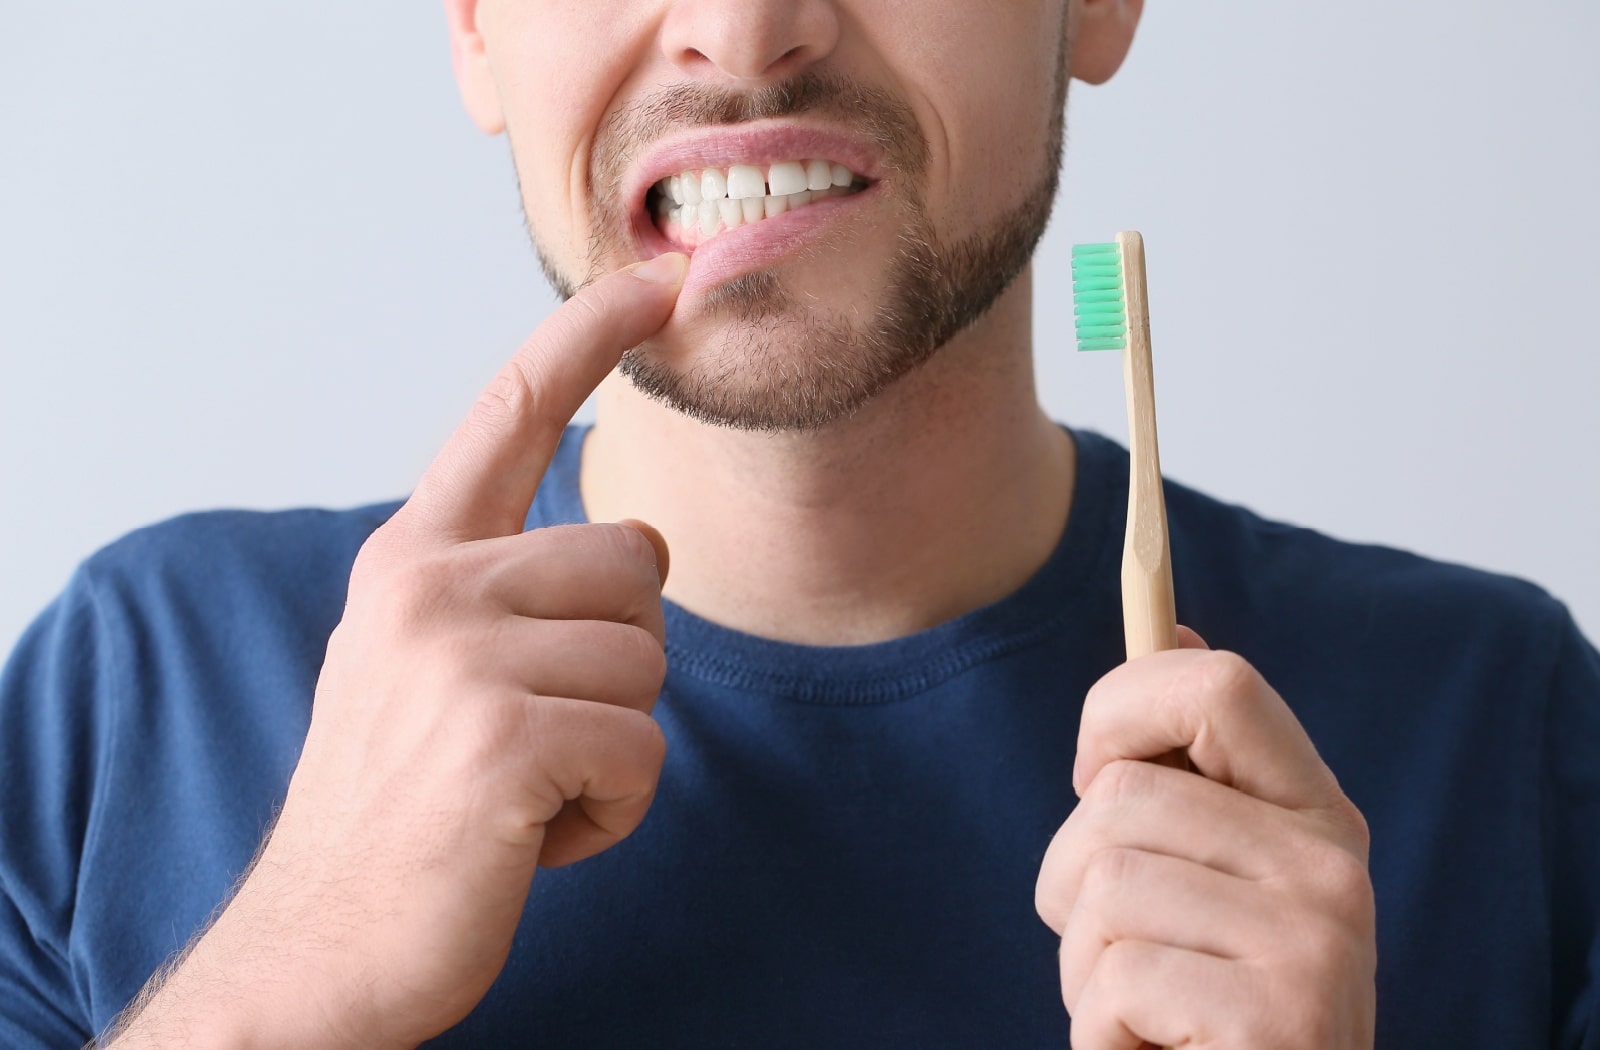 A man holding a toothbrush in his left hand and pulling down his lip slightly with his right hand to show his gumline